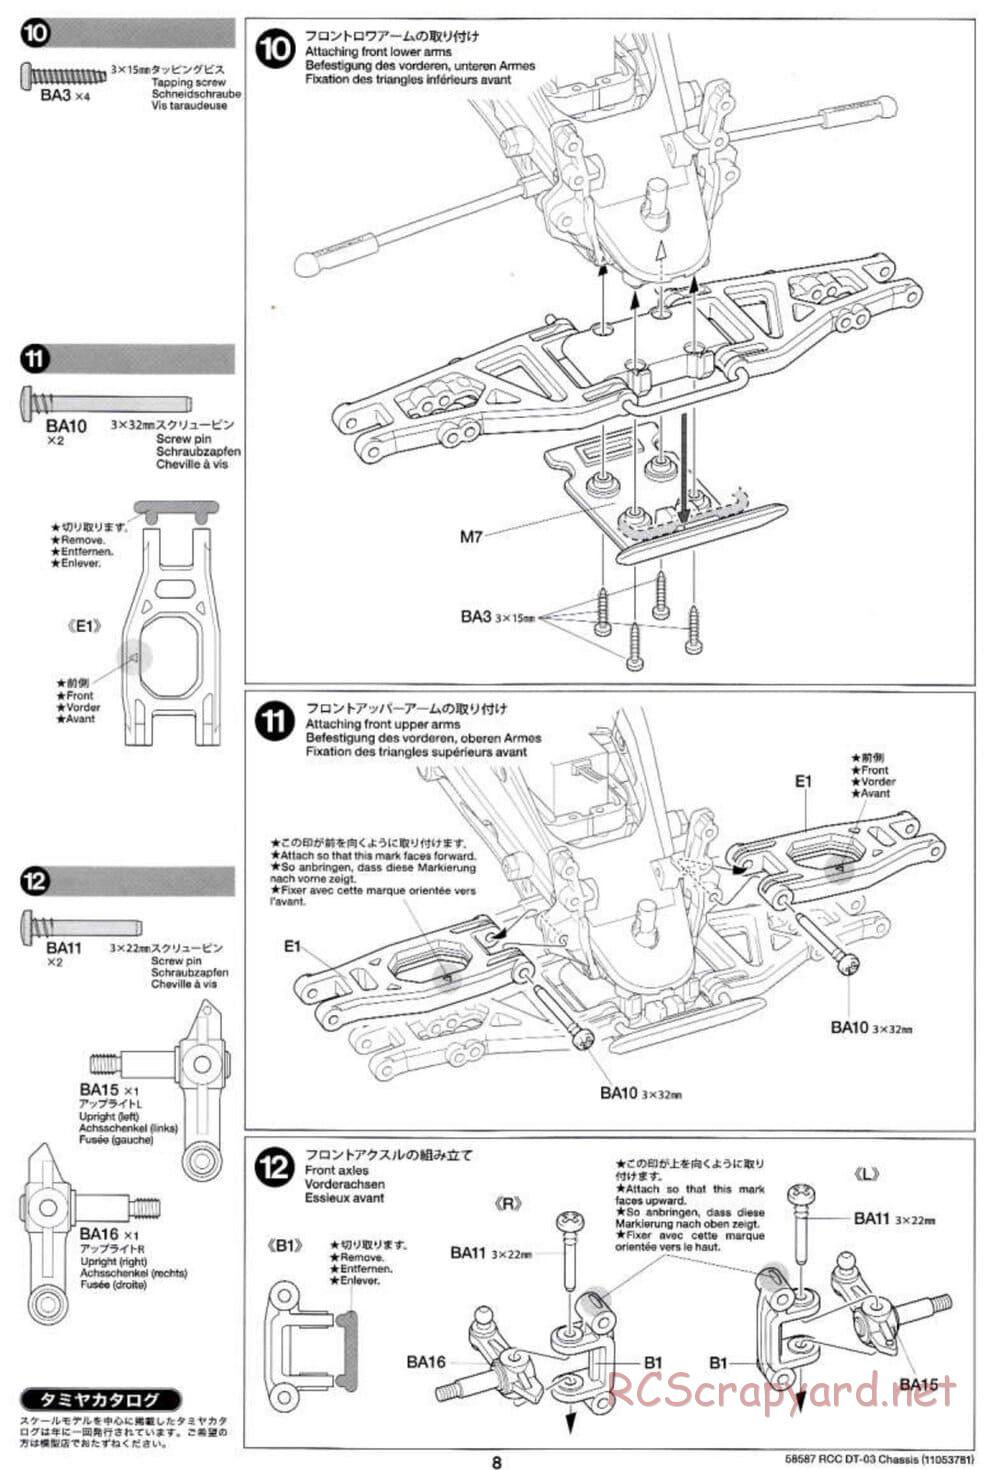 Tamiya - Neo Fighter Buggy Chassis - Manual - Page 8